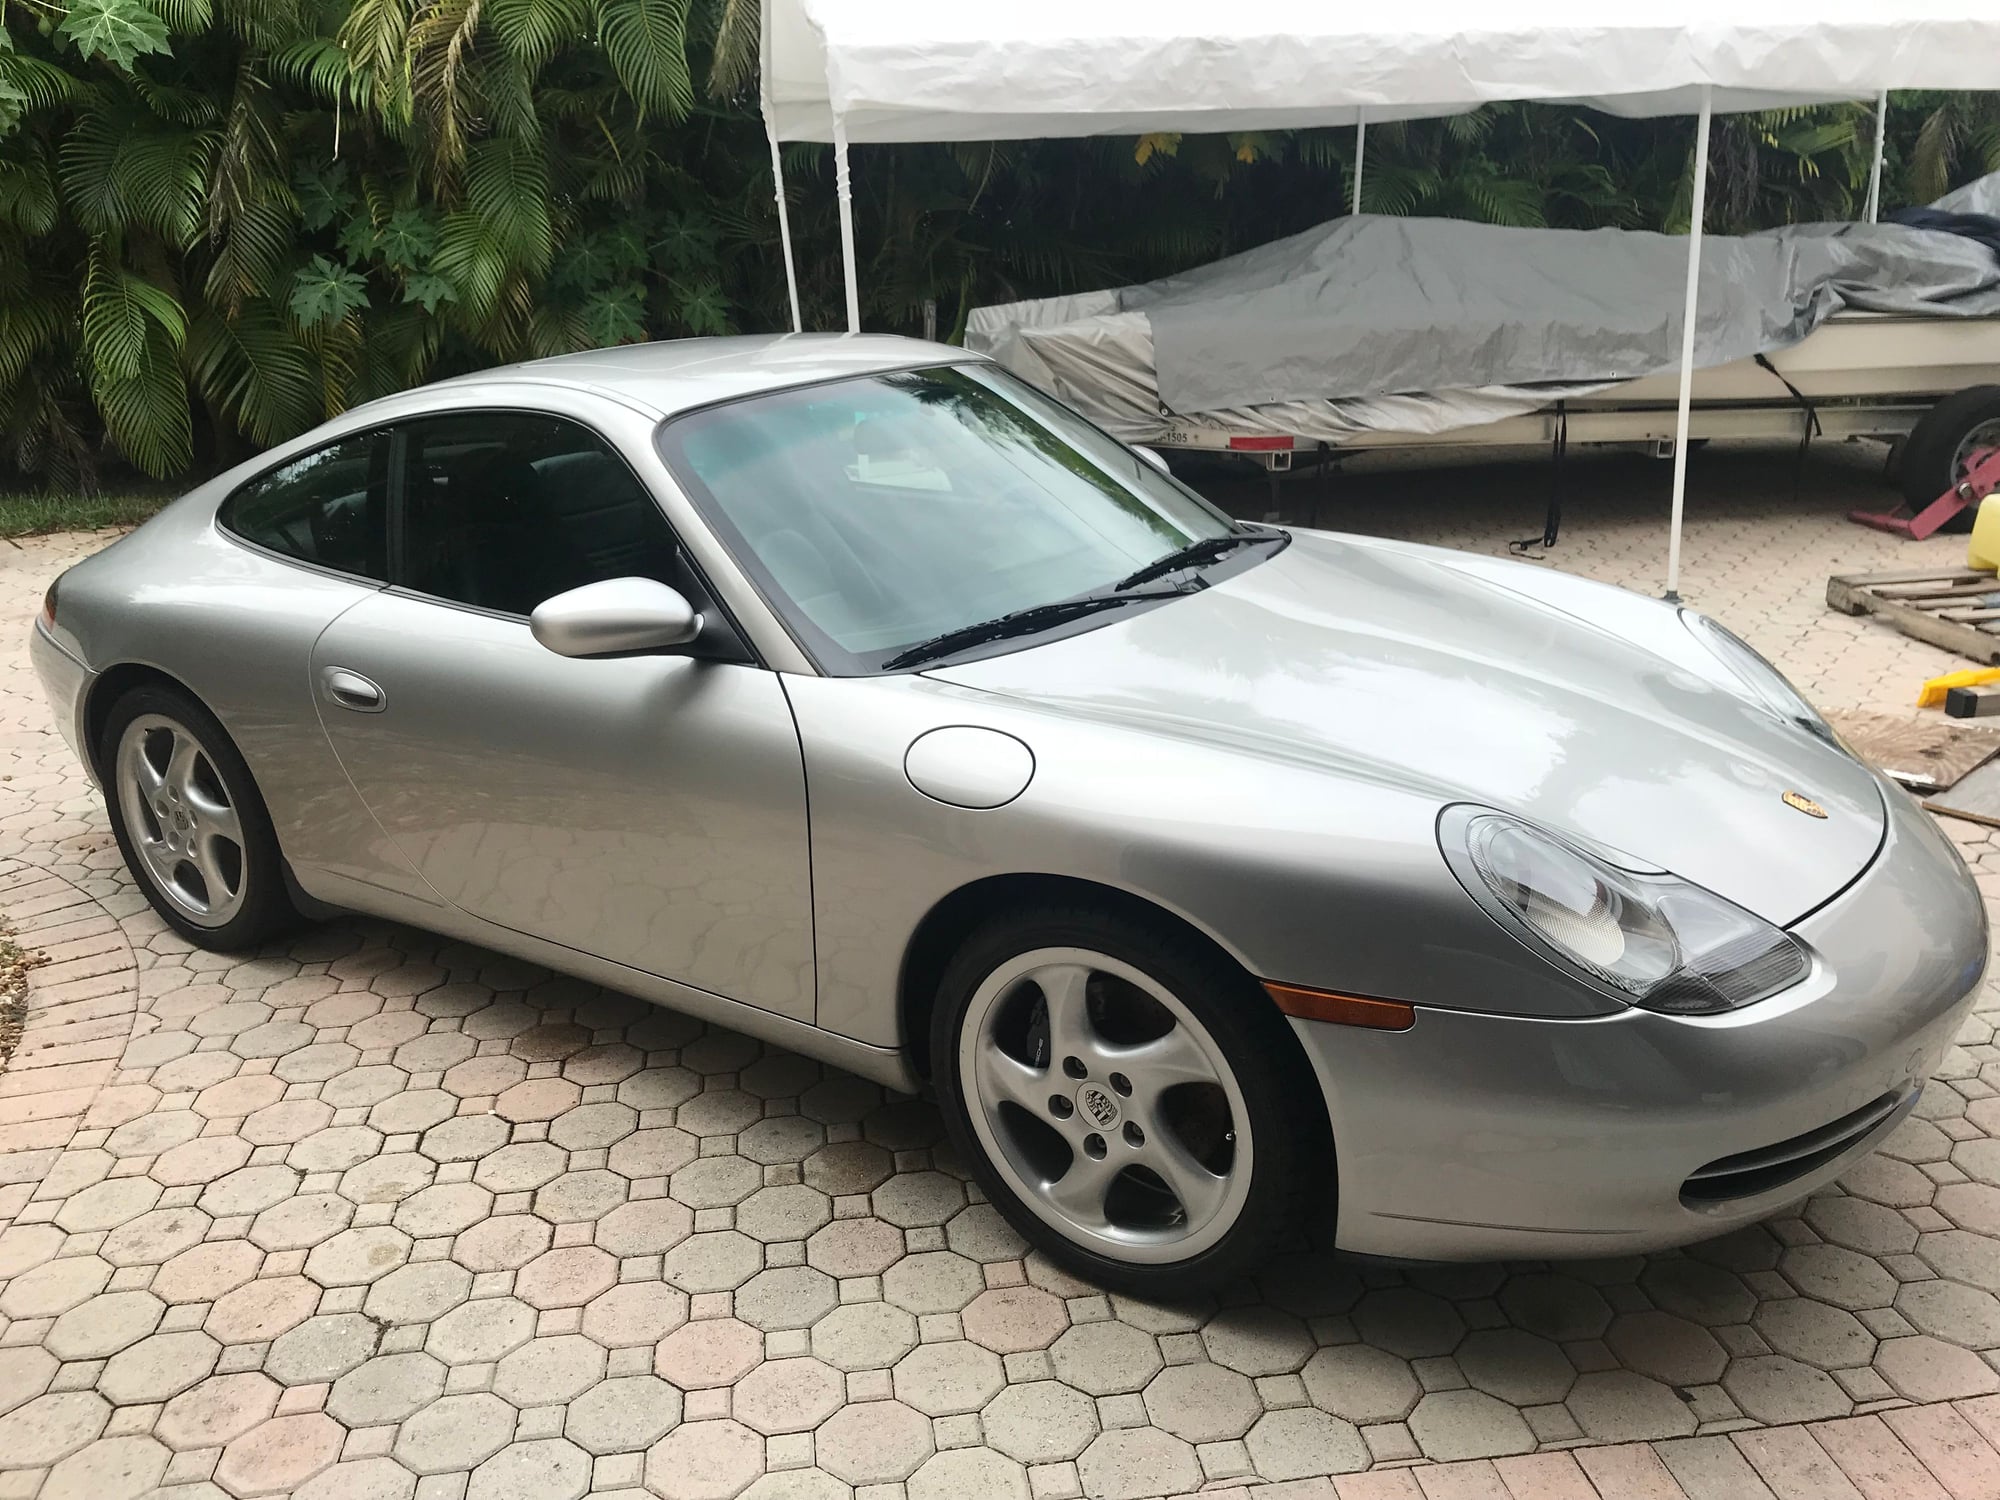 2001 Porsche 911 - 996 for sale, 55k miles, ims just done, silver ext black int - Used - VIN WPoAA29981S620745 - 55,000 Miles - 6 cyl - 2WD - Manual - Coupe - Silver - Longwood, FL 32750, United States